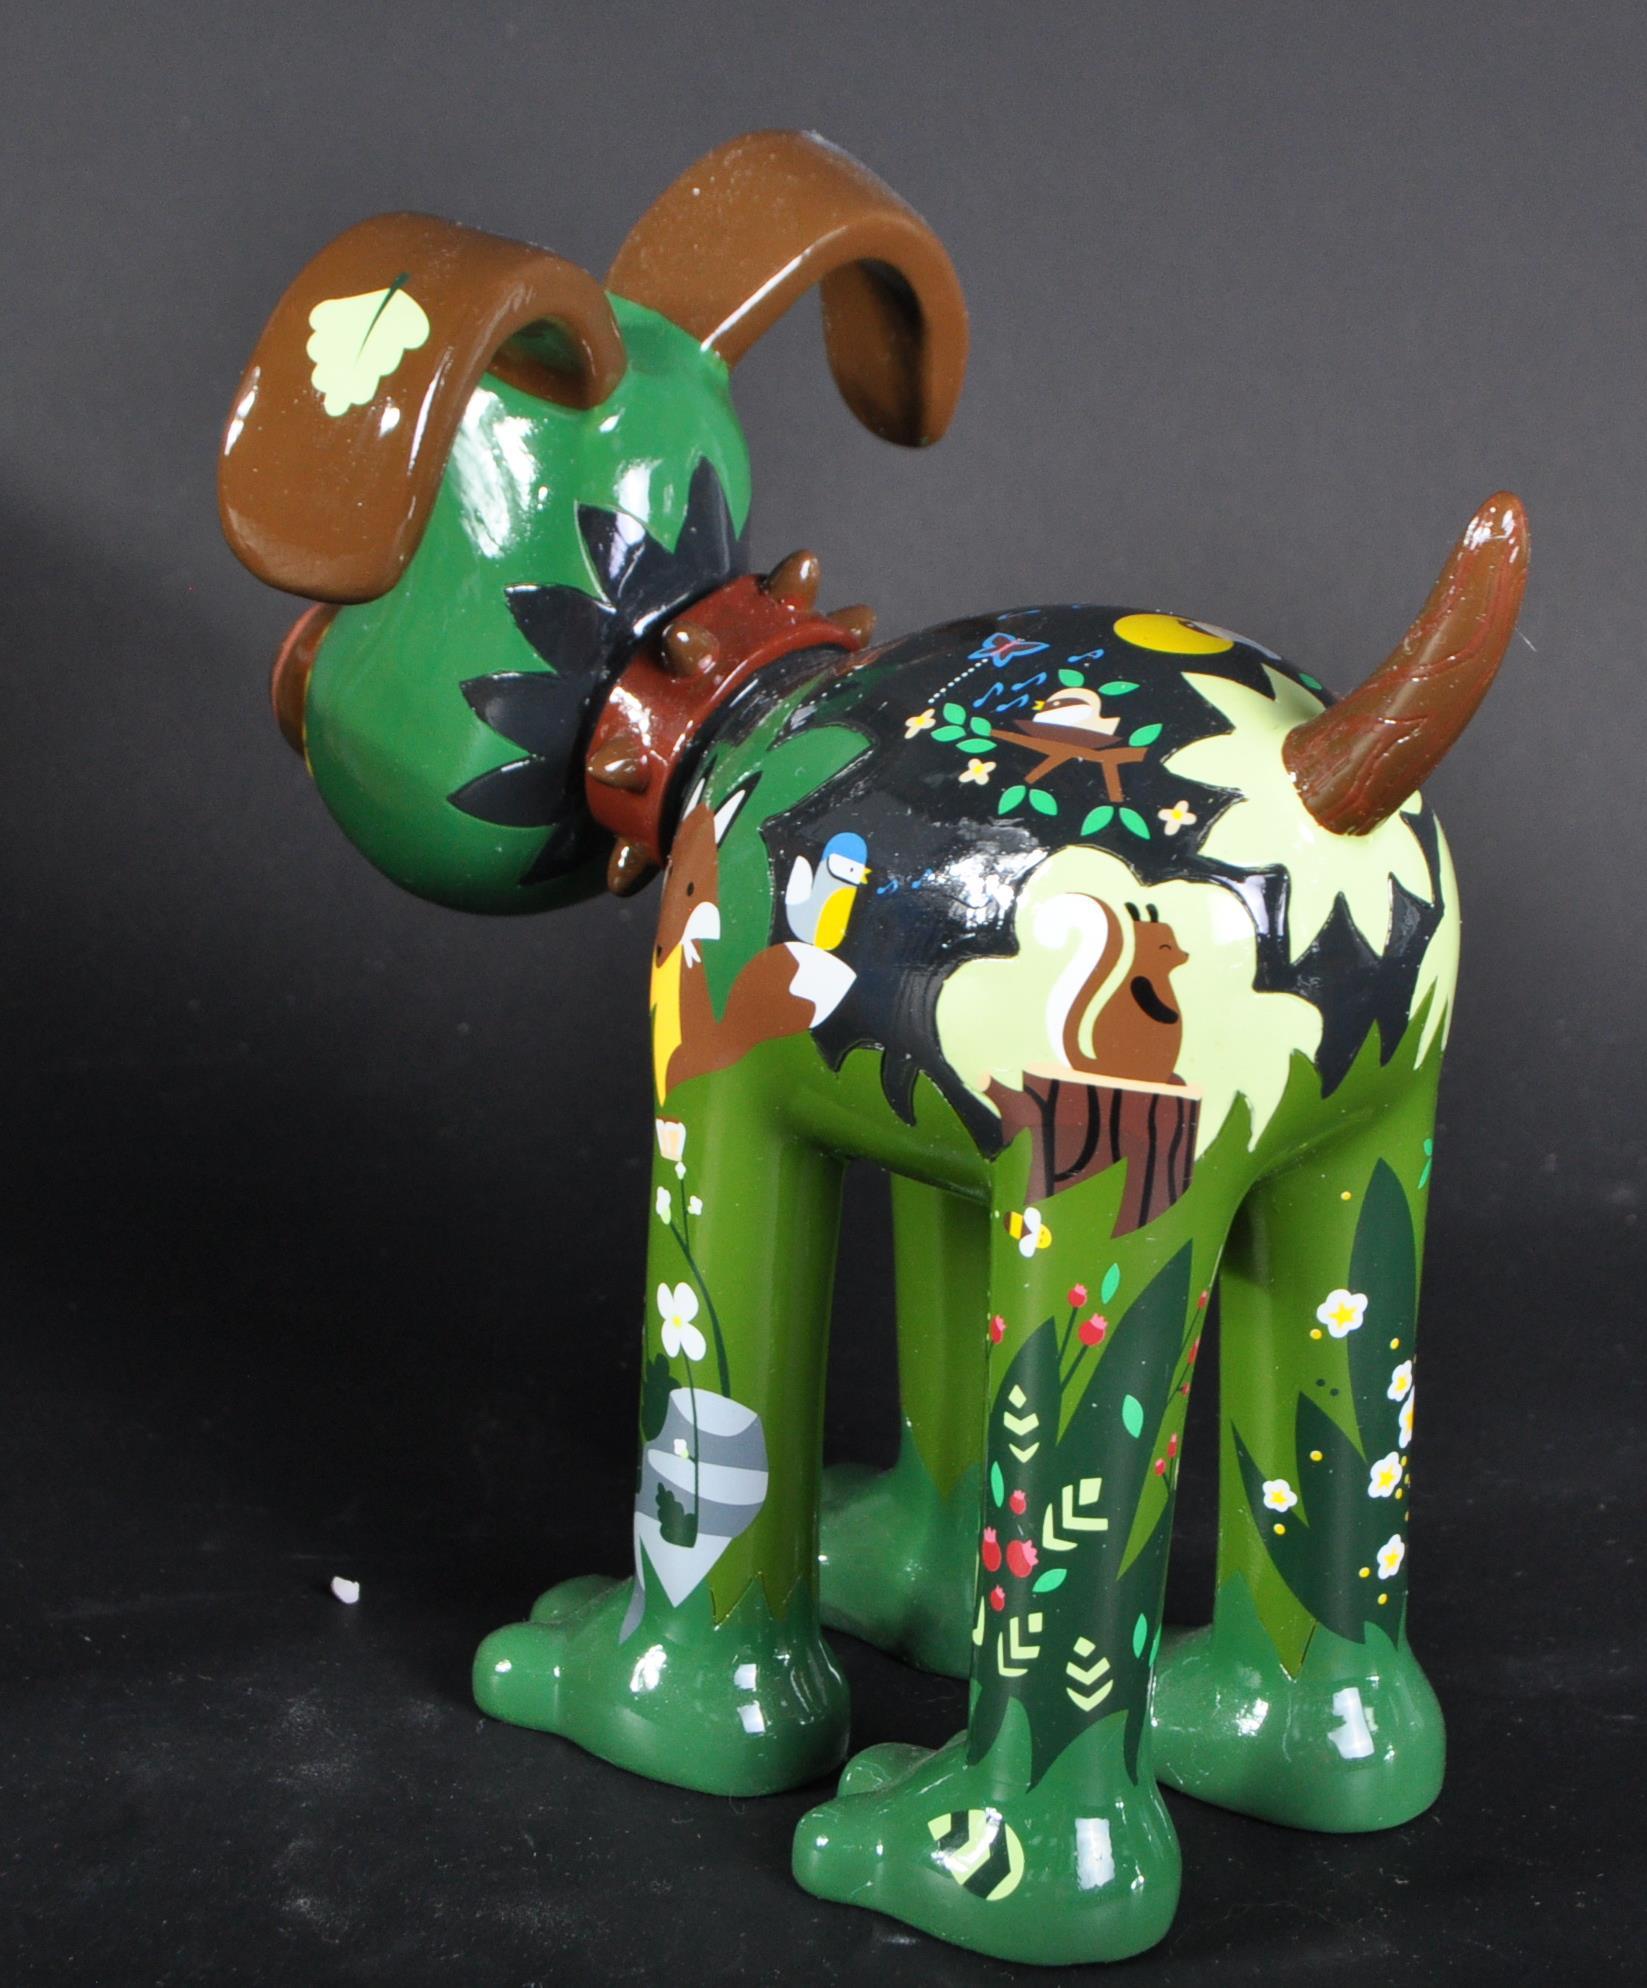 WALLACE & GROMIT - GROMIT UNLEASHED COLLECTABLE FIGURINE - Image 3 of 5